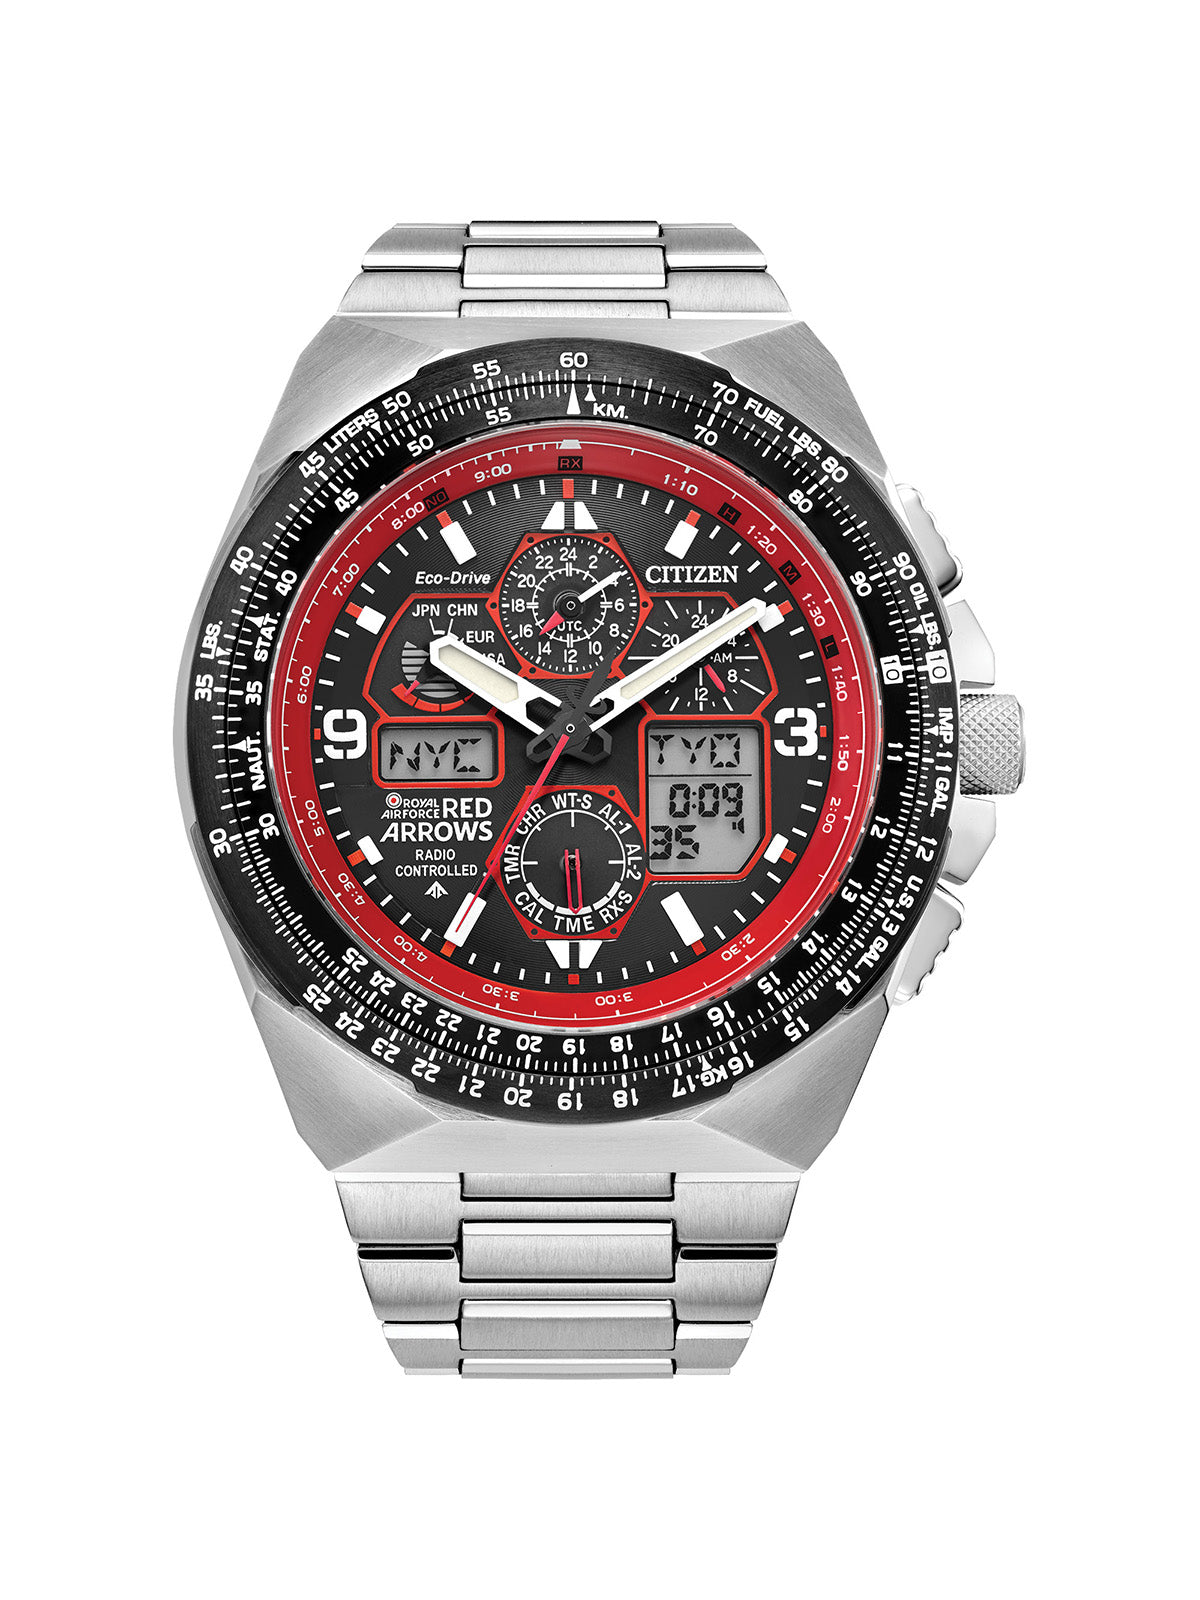 Citizen Eco-Drive Red Arrows Limited Edition Skyhawk A.T Watch 46mm JY8126-51E